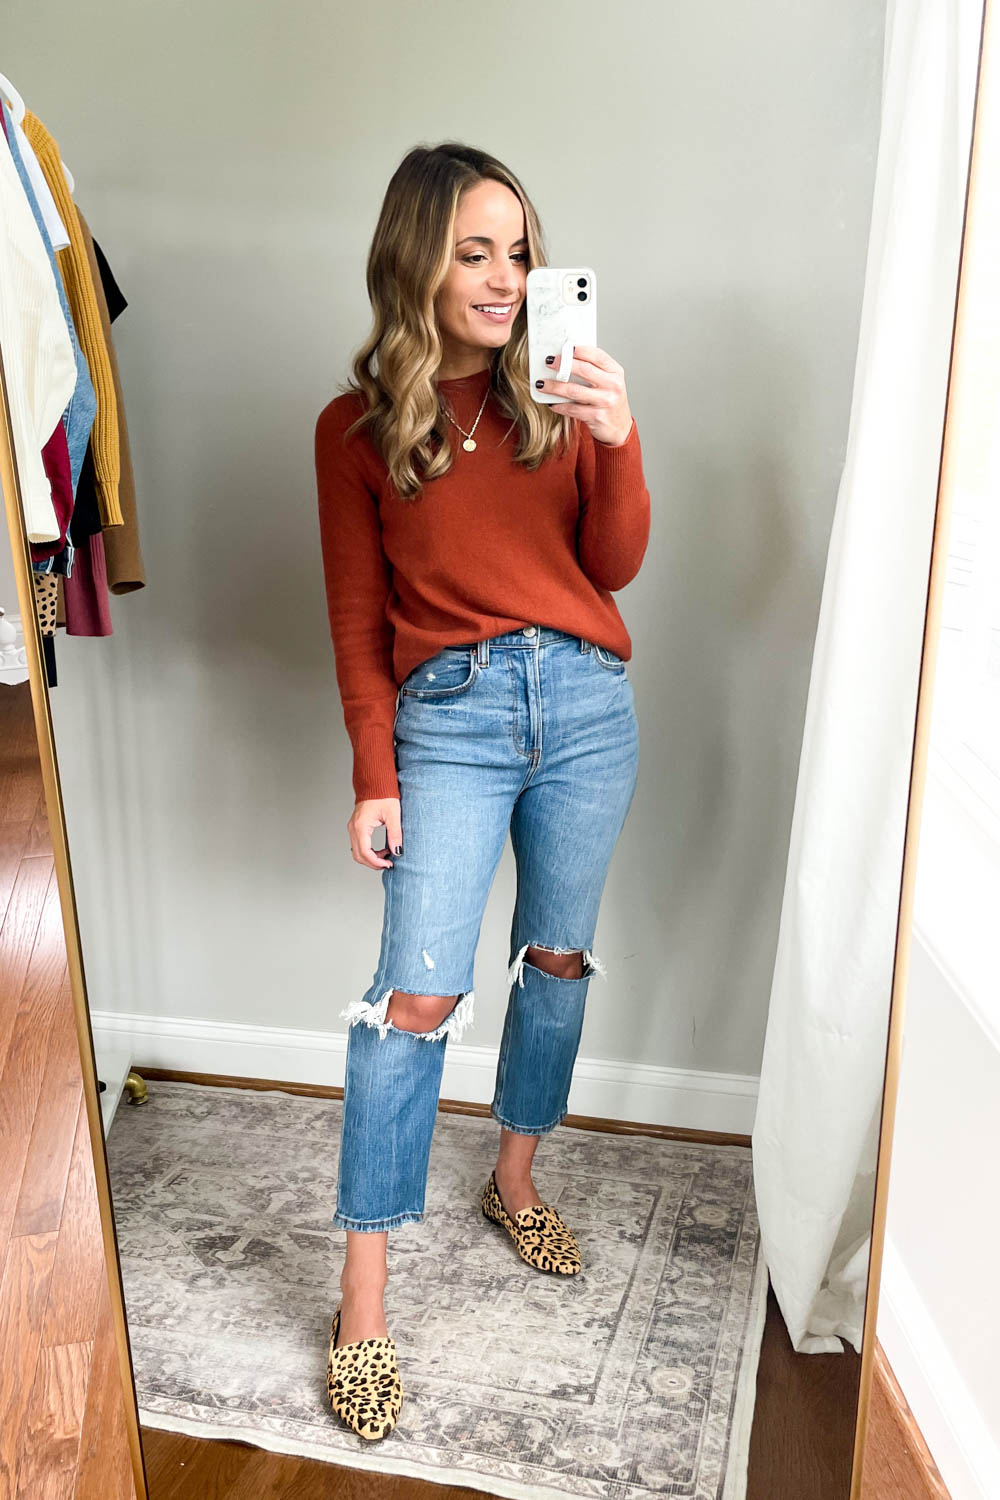 Simple fall outfit via pumps and push-ups blog | straight-leg jeans outfits via pumps and push-ups blog | petite fashion | petite style | fall outfits 